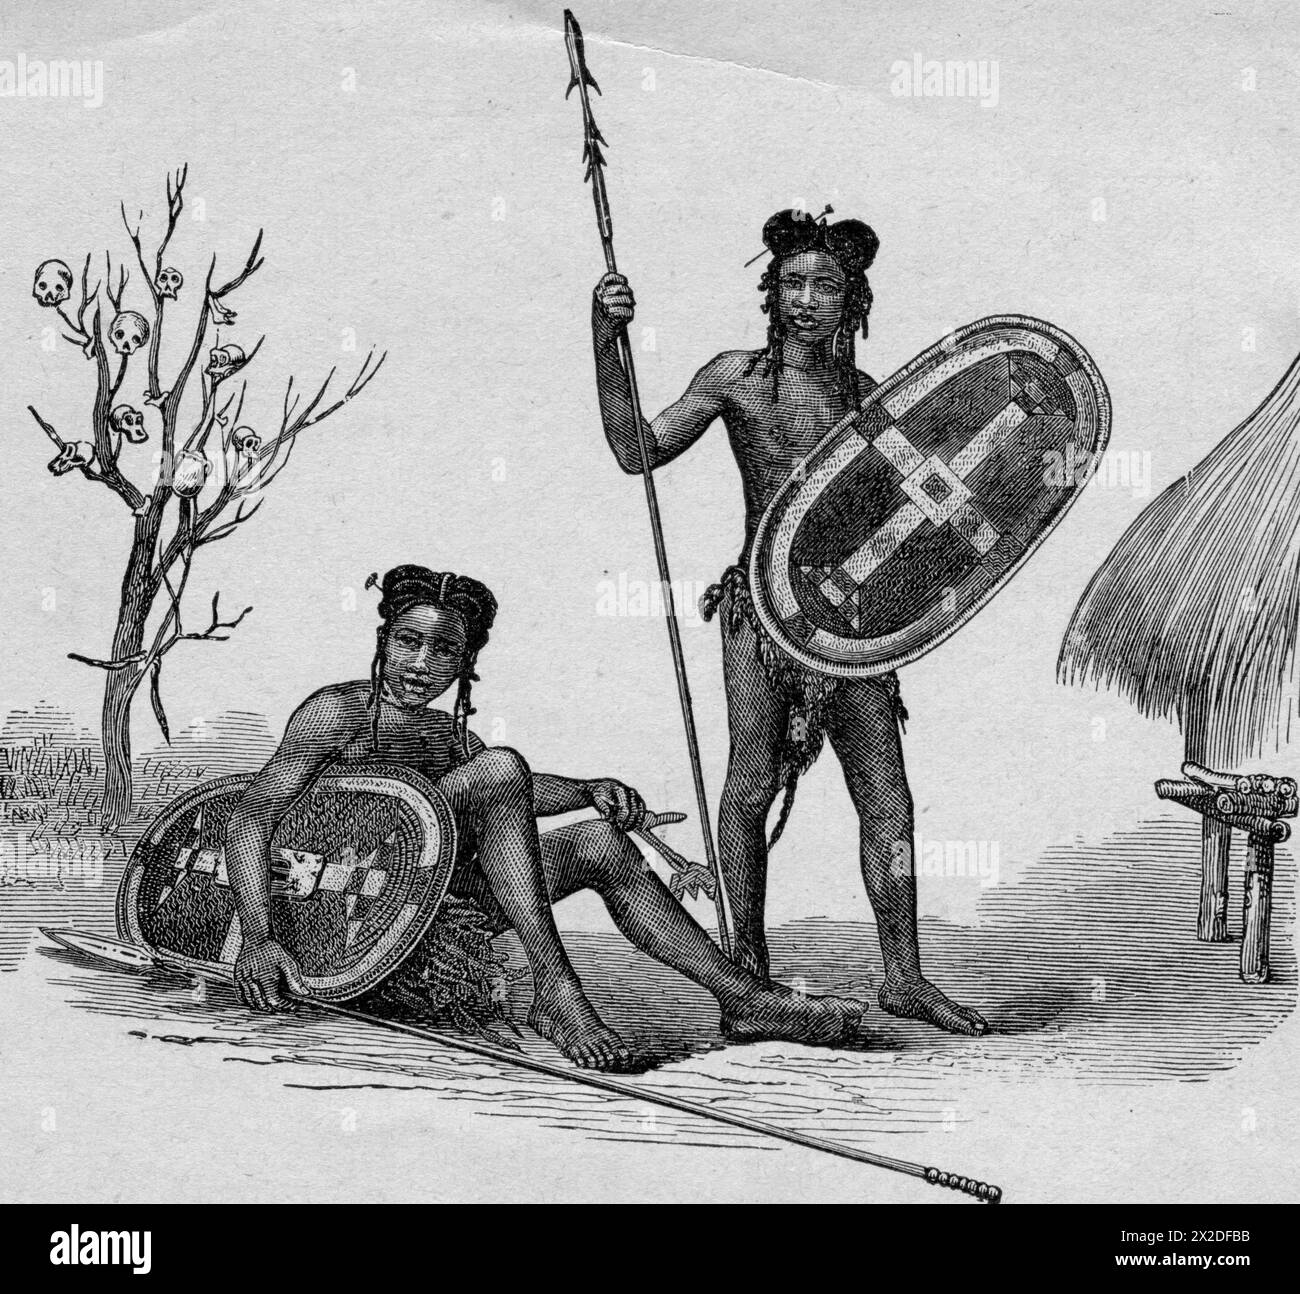 people, ethnicity, Africa, Zande, warriors, wood engraving based on drawing by George Schweinfurth, ADDITIONAL-RIGHTS-CLEARANCE-INFO-NOT-AVAILABLE Stock Photo